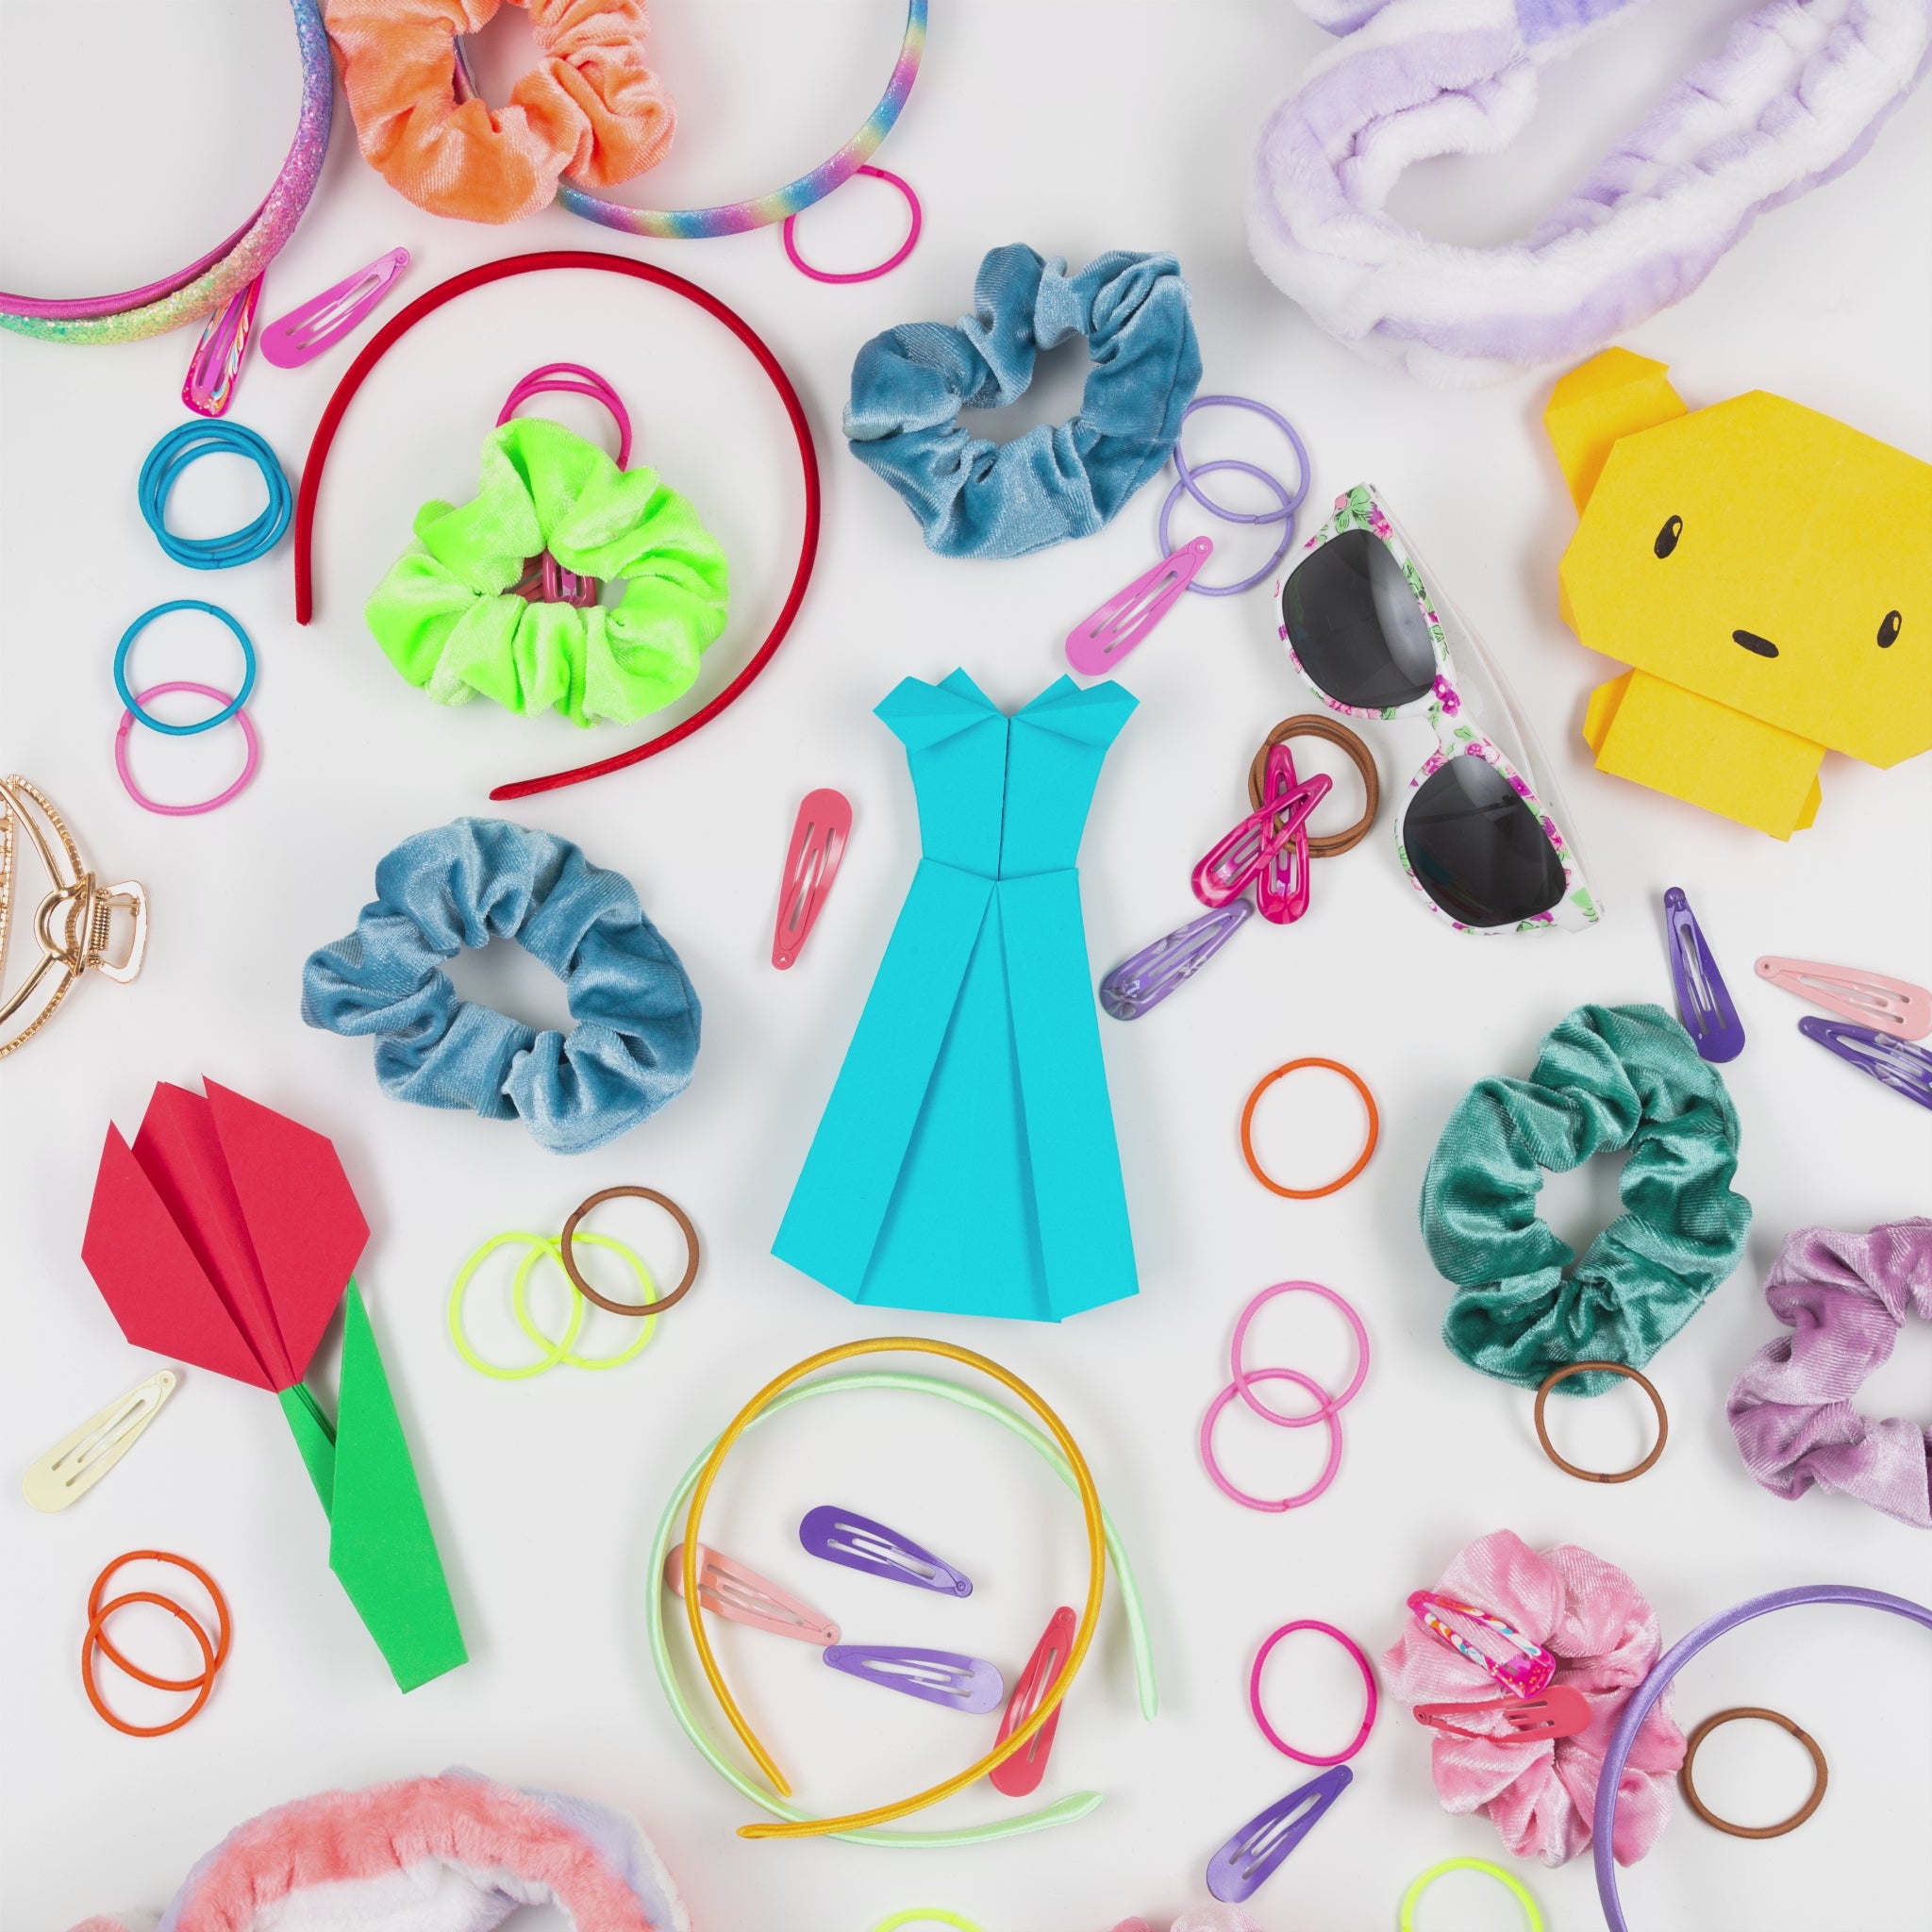 Load video: This stop motion image shows lots of hair accessories against a white background. The accessories wiggle out of the frame as the mint green hair accessory storage box enters. A finger presses on it and it turns to pink. It then opens and it is empty. With the wave of a hand it is filled with beautiful hair accessories. The box then closes and wiggles out of the frame.